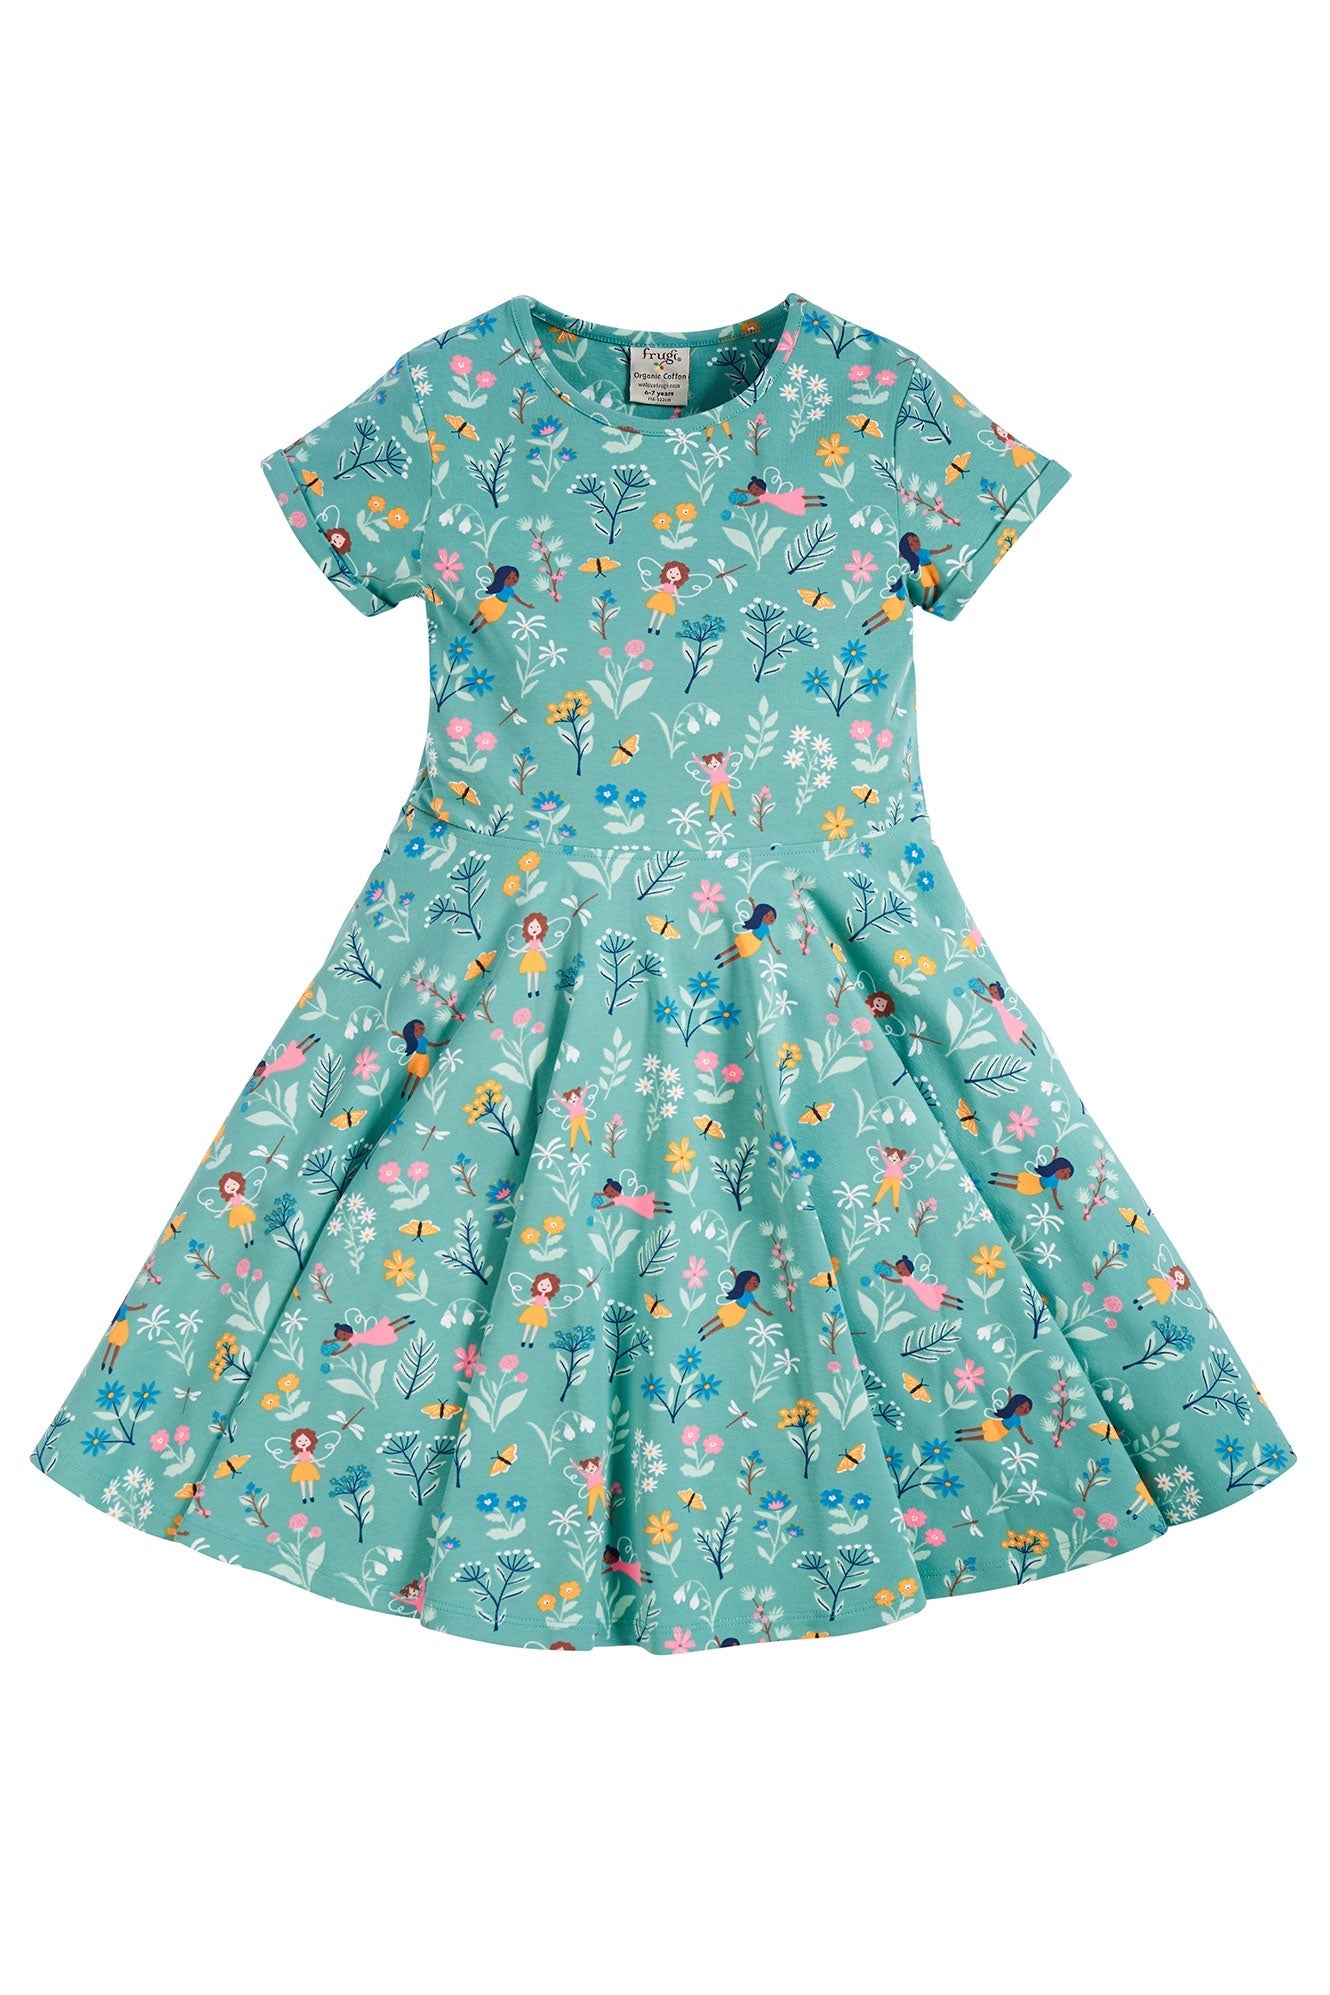 Frugi Spring Skater Dress in Moss Forest Fairies-Kids-Ohh! By Gum - Shop Sustainable